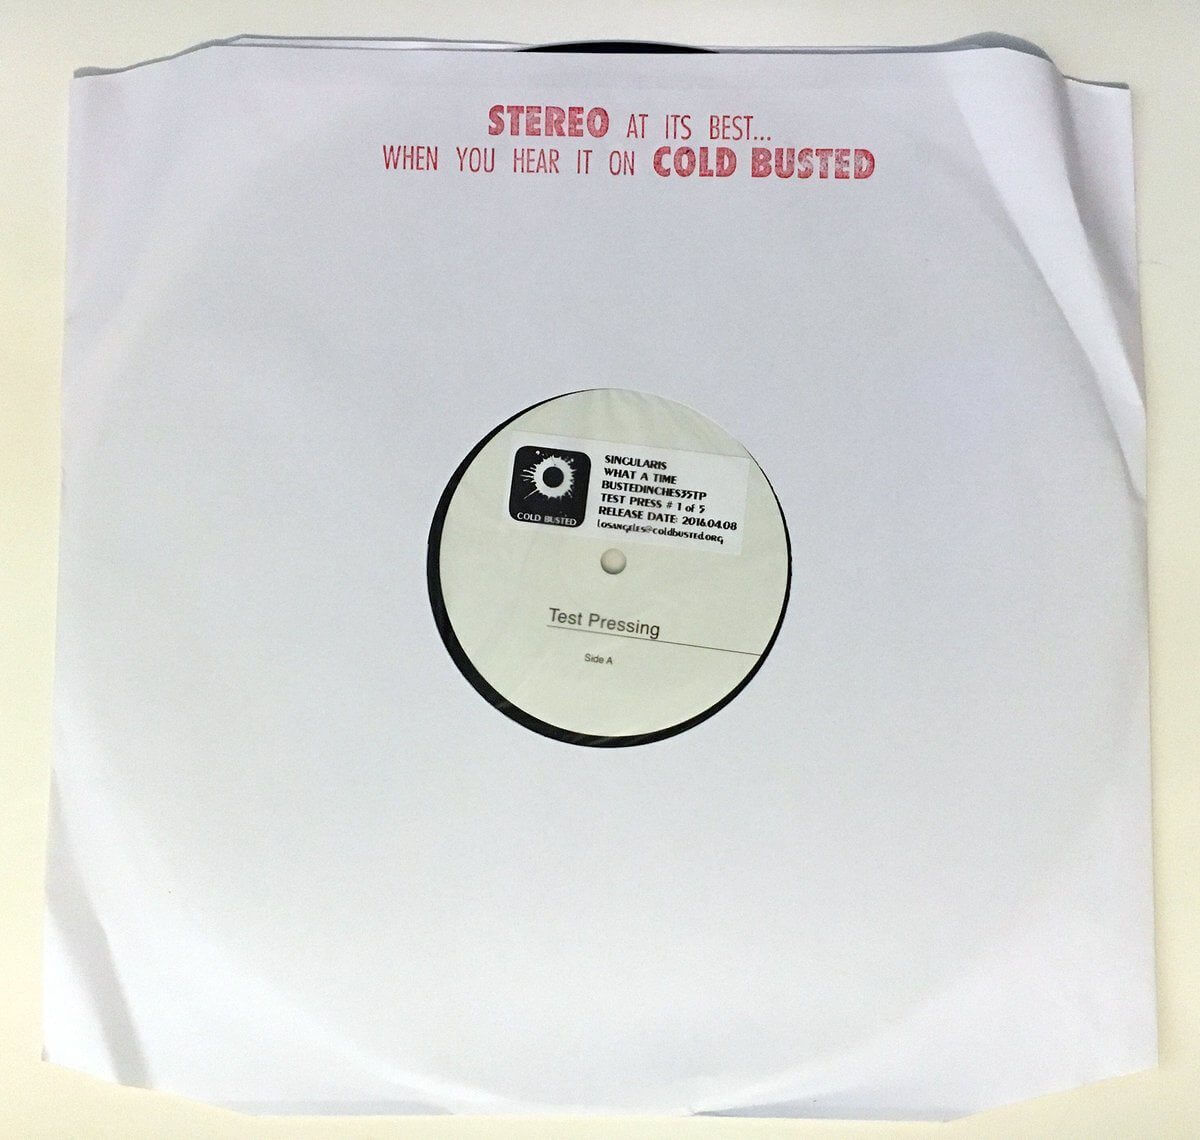 Singularis - What A Time - Limited Edition 12 Inch Vinyl Test Pressing - Cold Busted